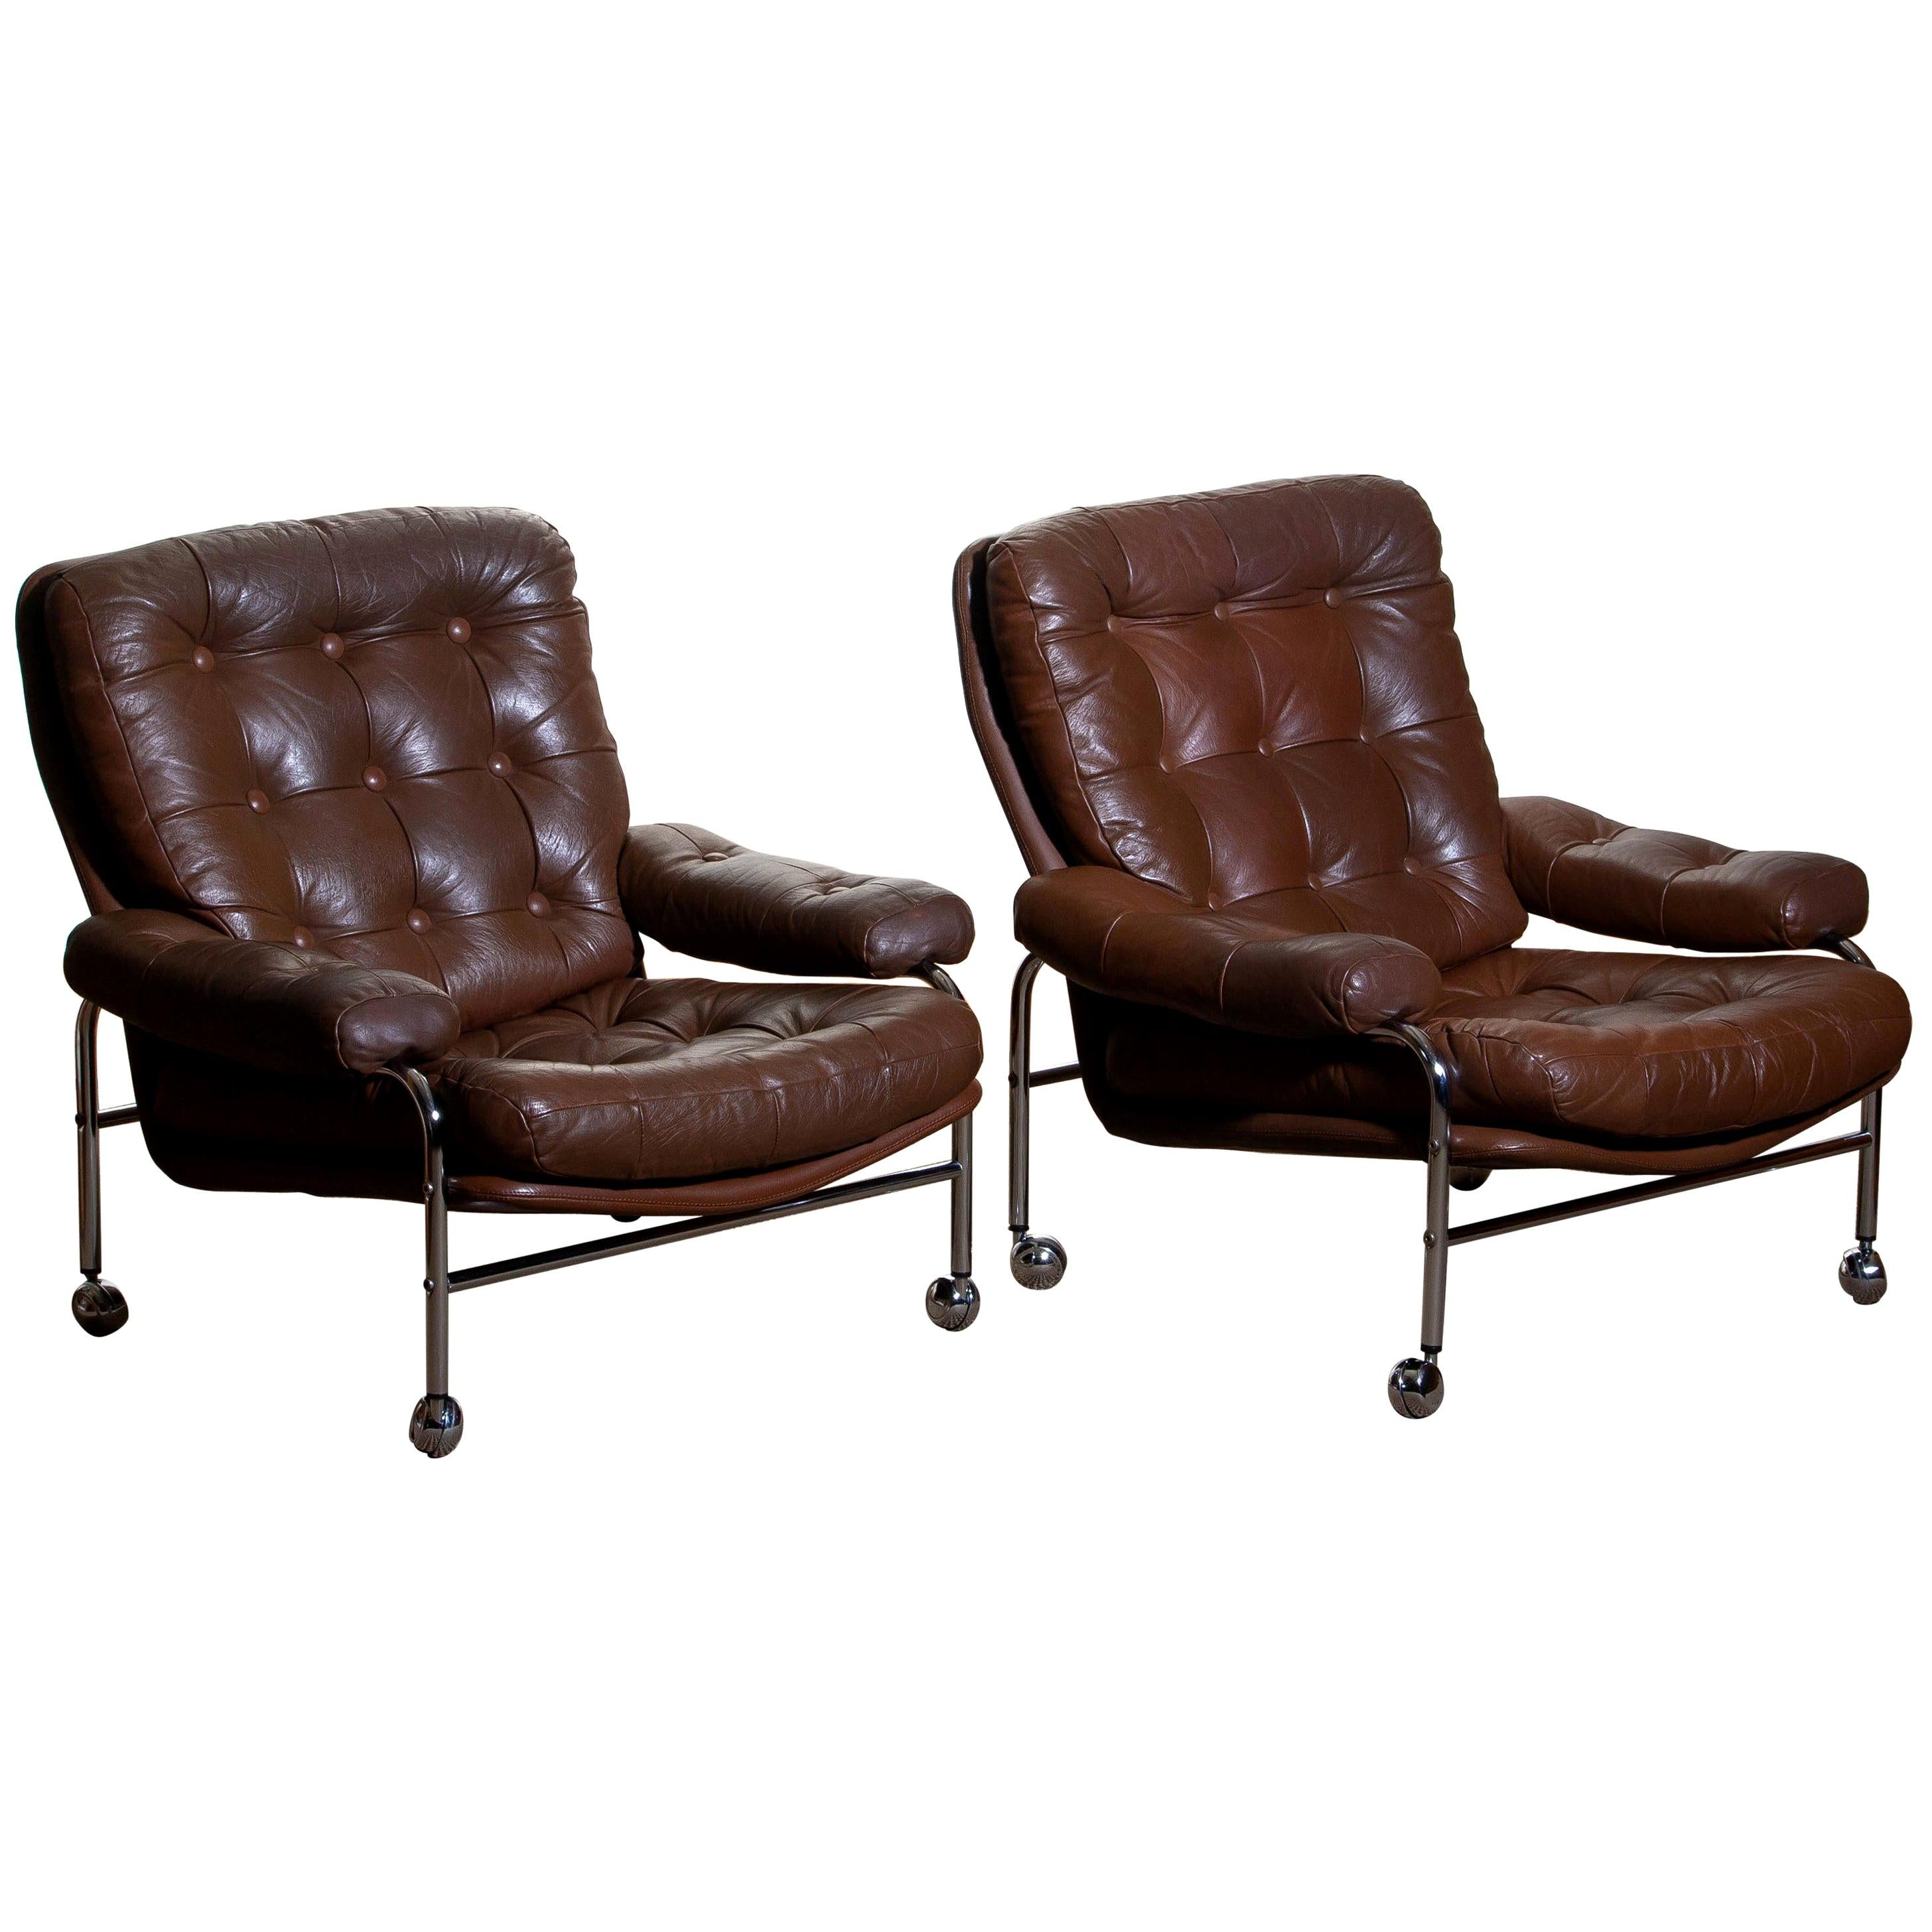 Late 20th Century 1970s, Chrome and Brown Leather Lounge Chairs by Scapa Rydaholm, Sweden